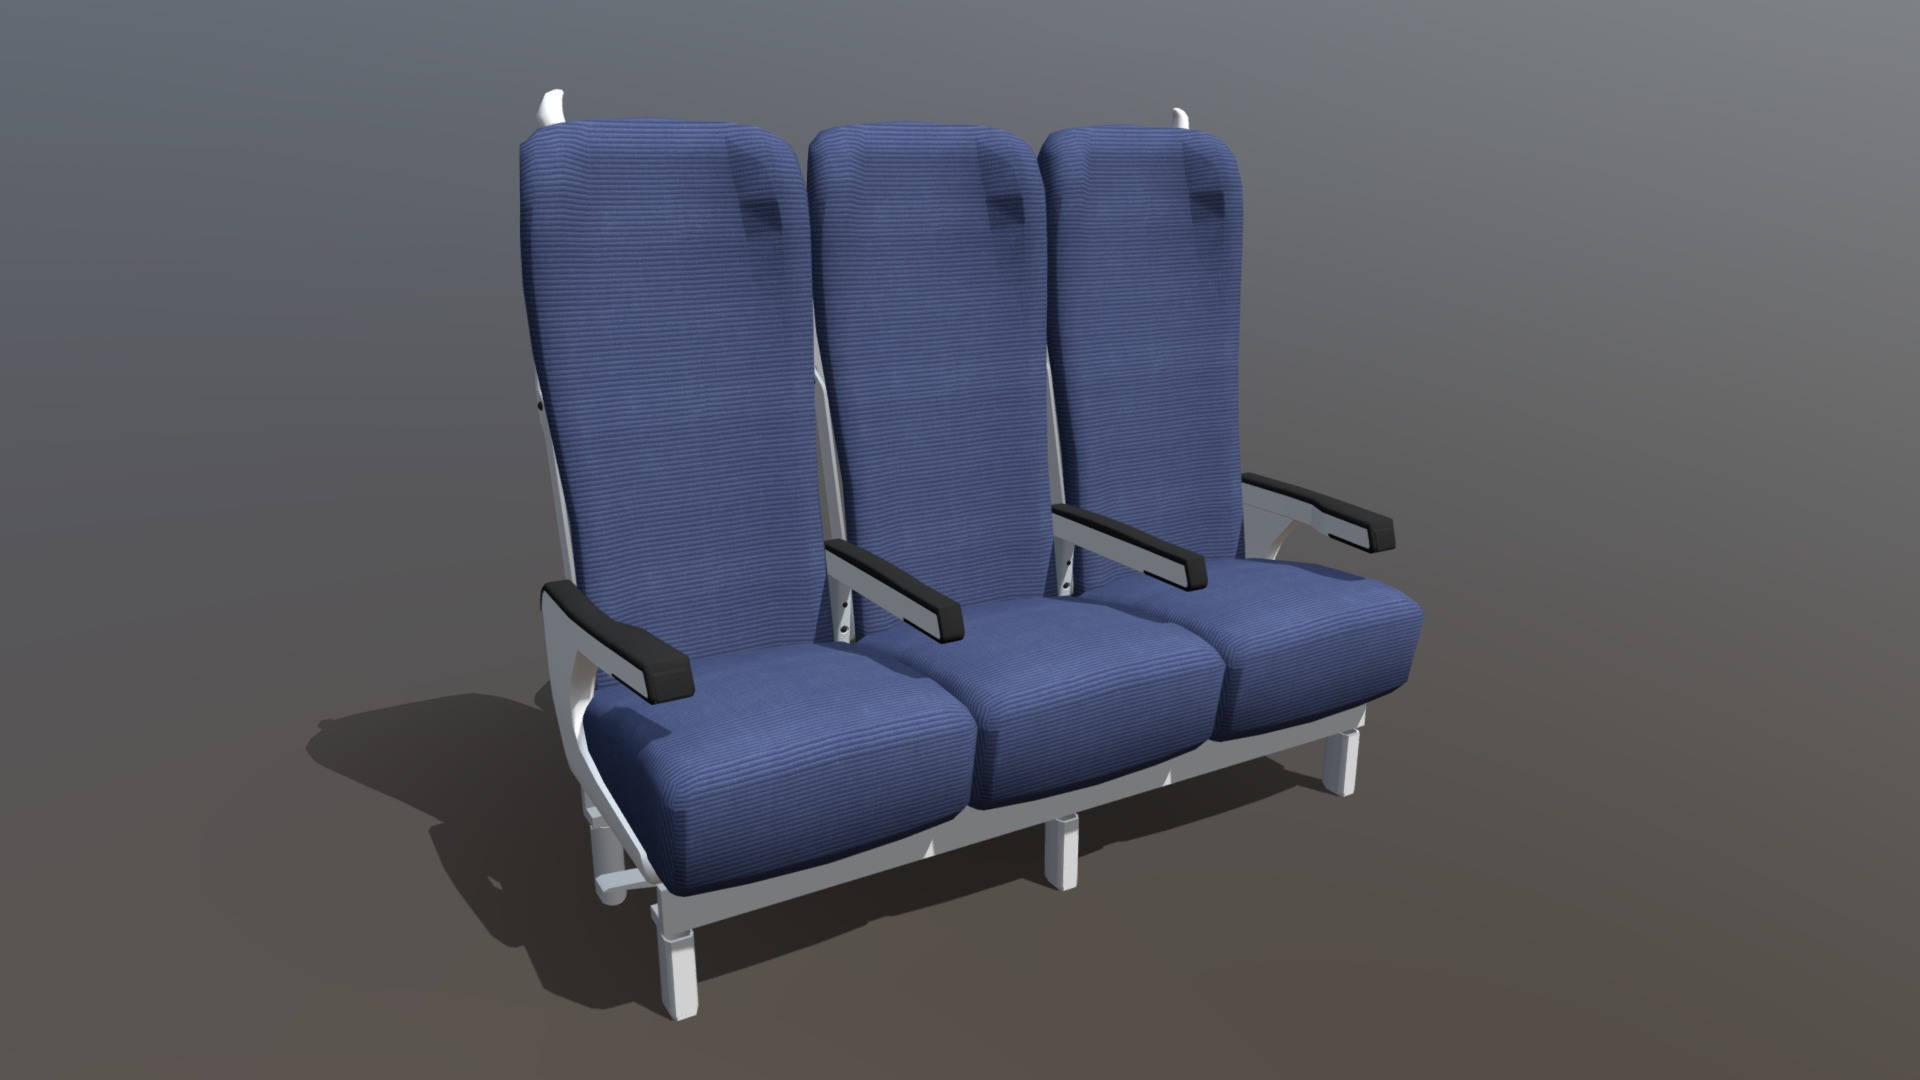 3D model Train seat 015 - This is a 3D model of the Train seat 015. The 3D model is about a couple of blue chairs.